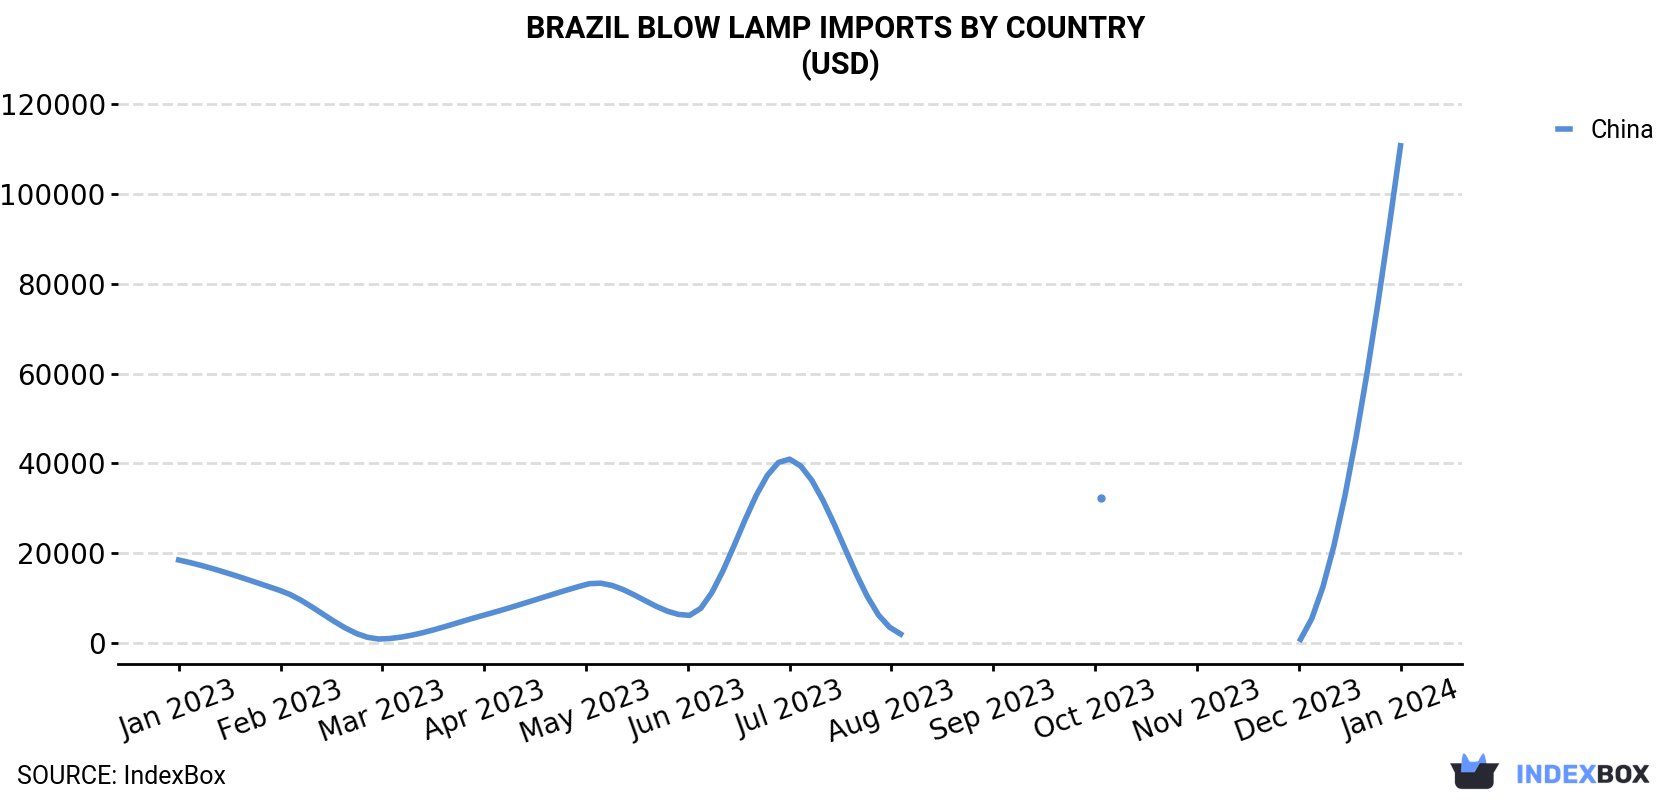 Brazil Blow Lamp Imports By Country (USD)